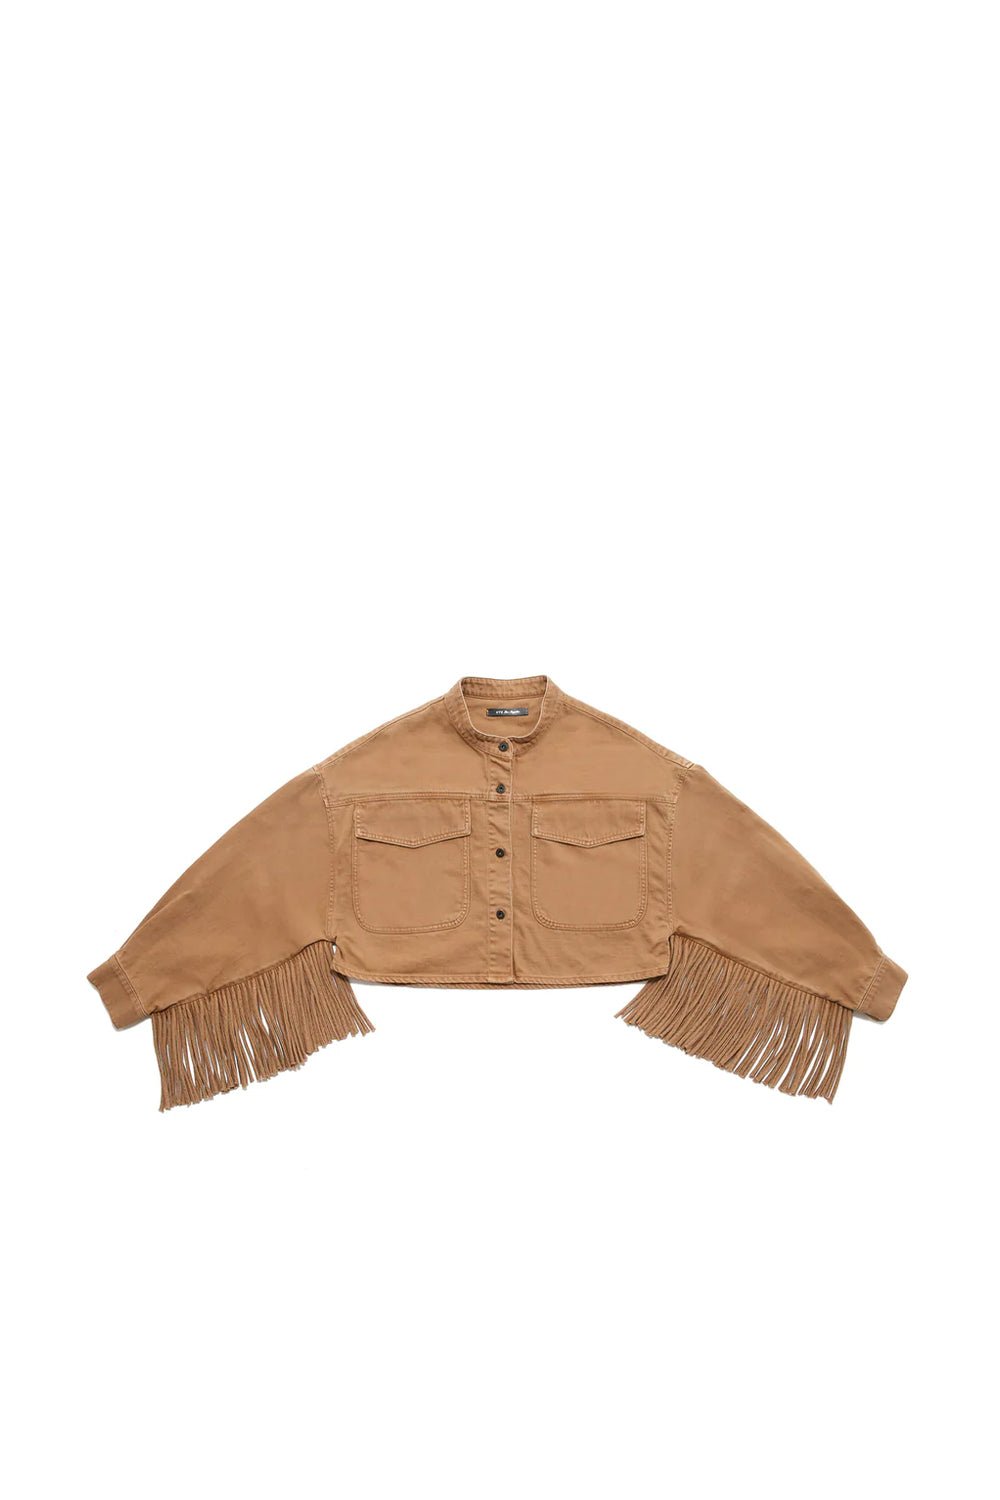 SOLEIL NEVADA Suede cropped jacket. Front button closure. Front pockets. Fringes on the back. HTC LOS ANGELES